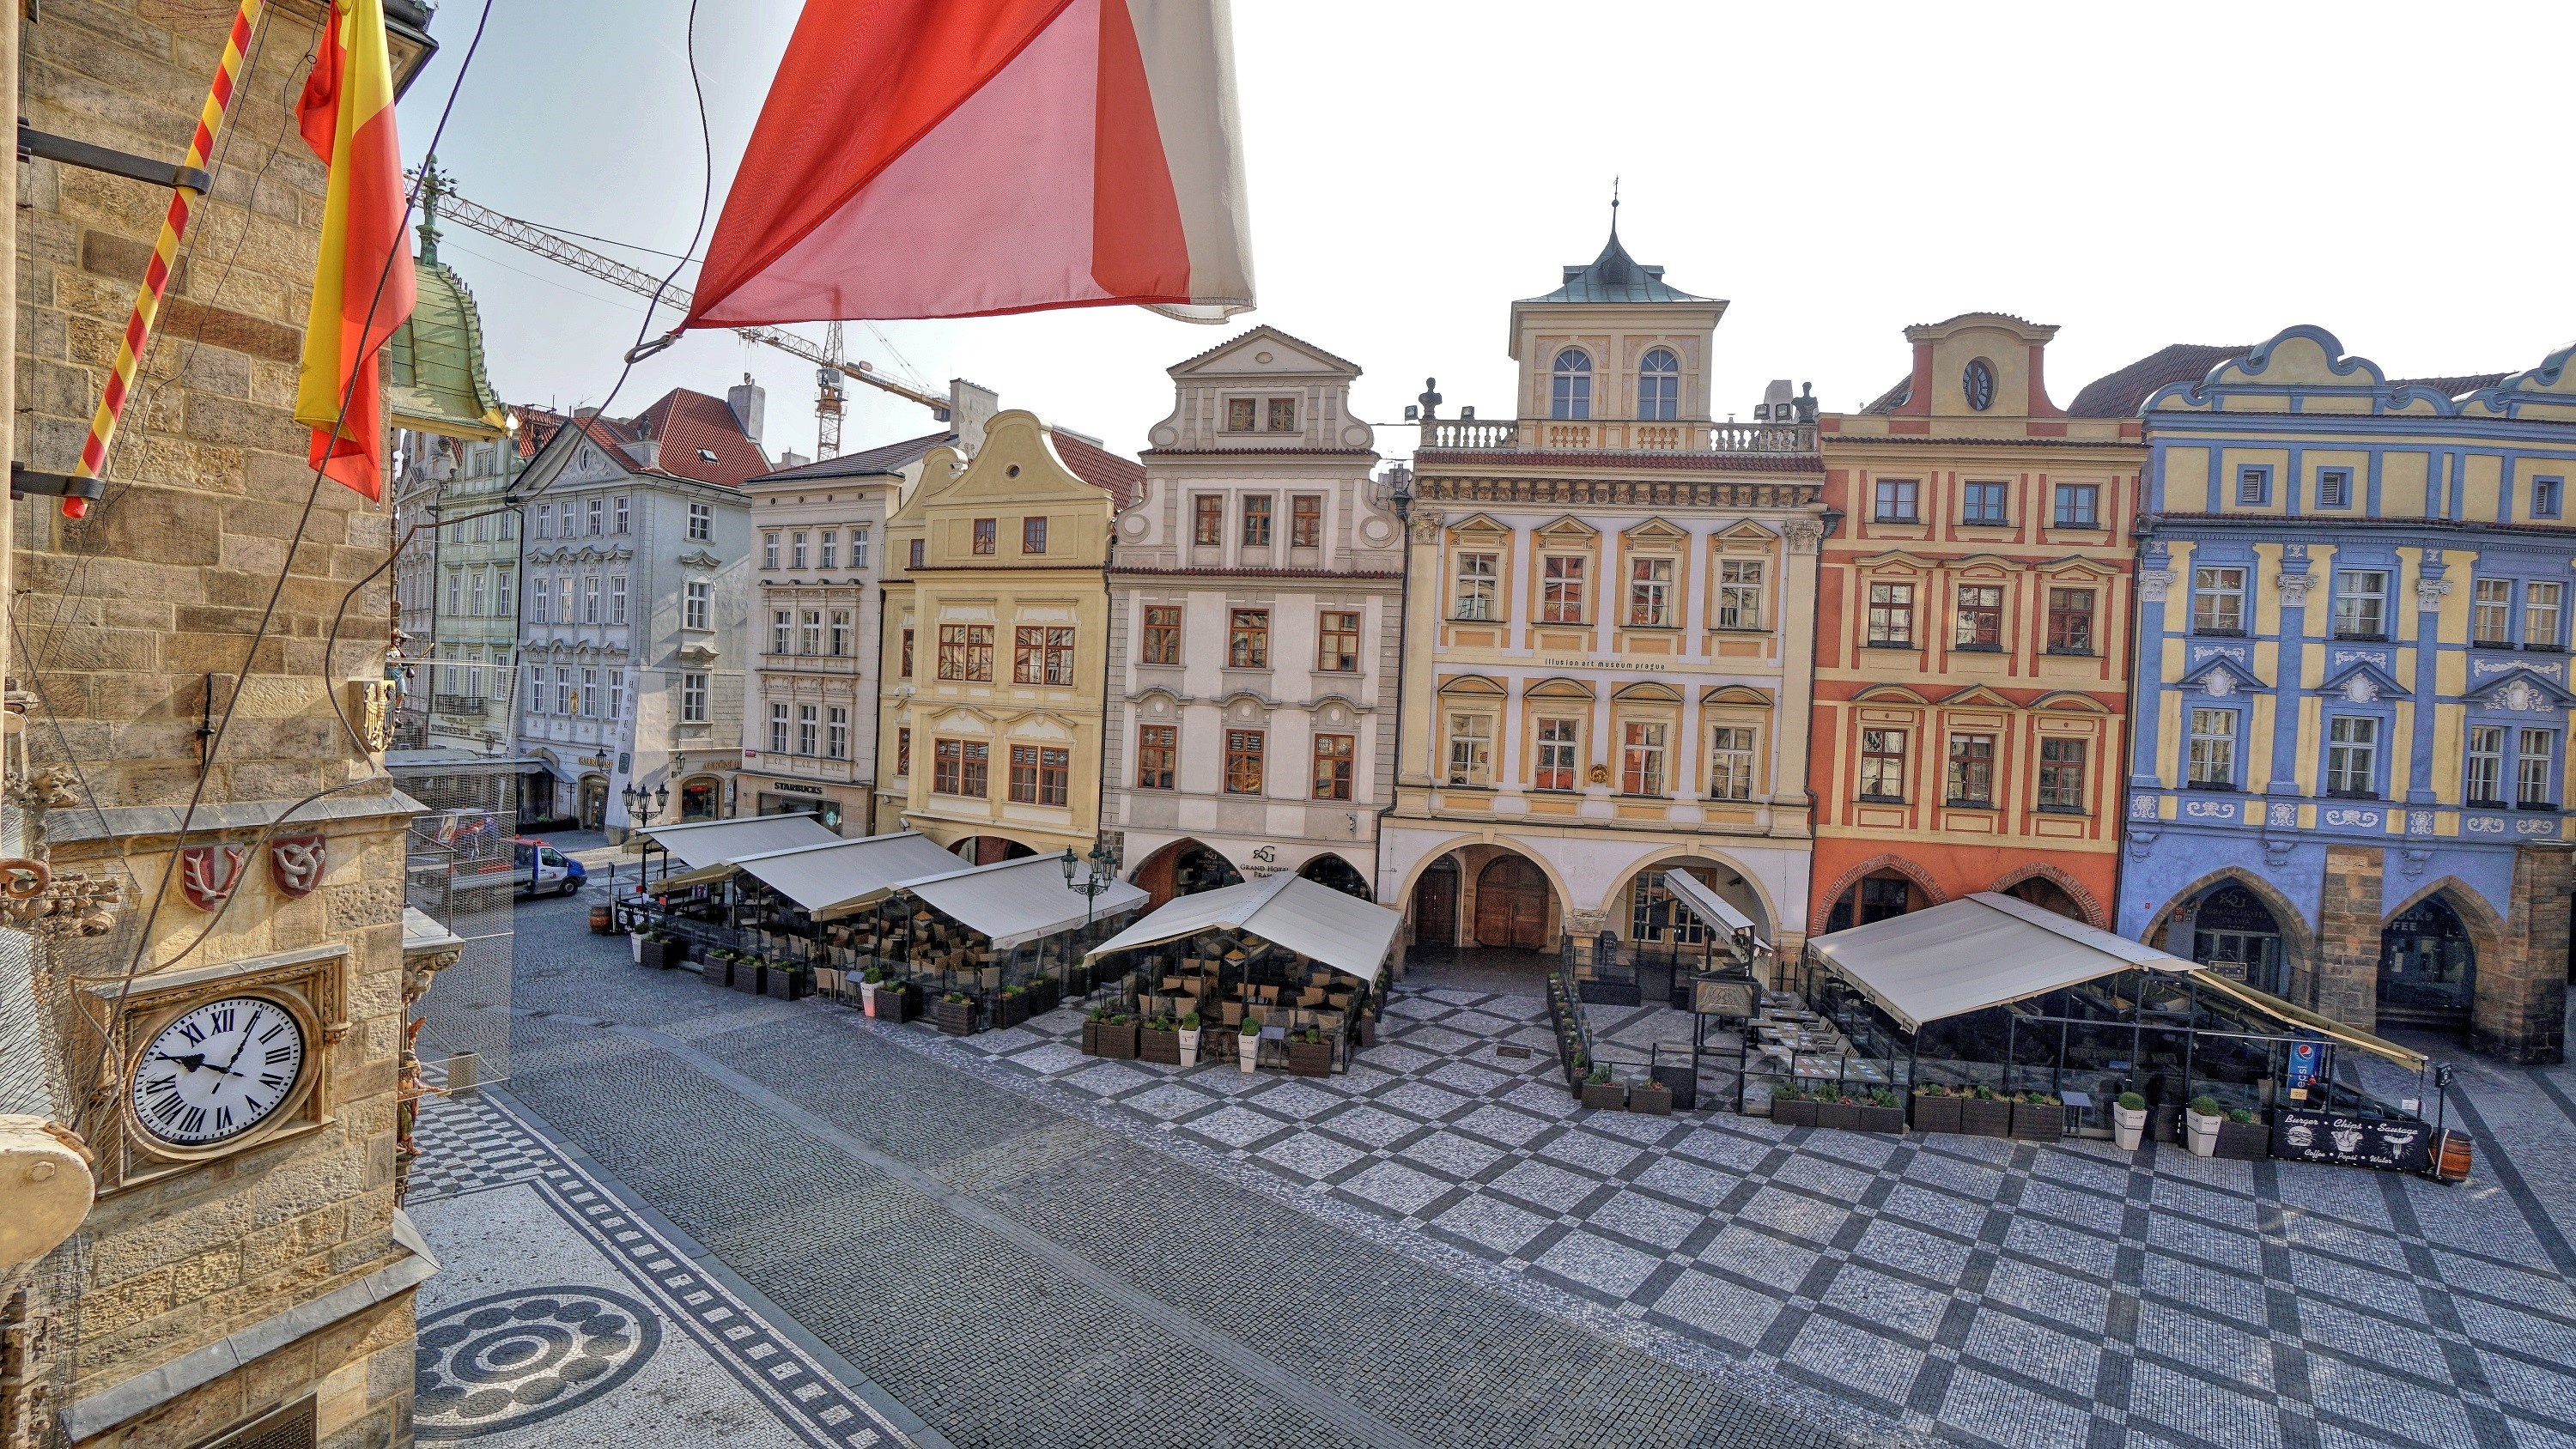 City Square: A fair at the Old Town Plaza in Prague, Cafes at an open public place, Czech Republic. 3000x1690 HD Wallpaper.